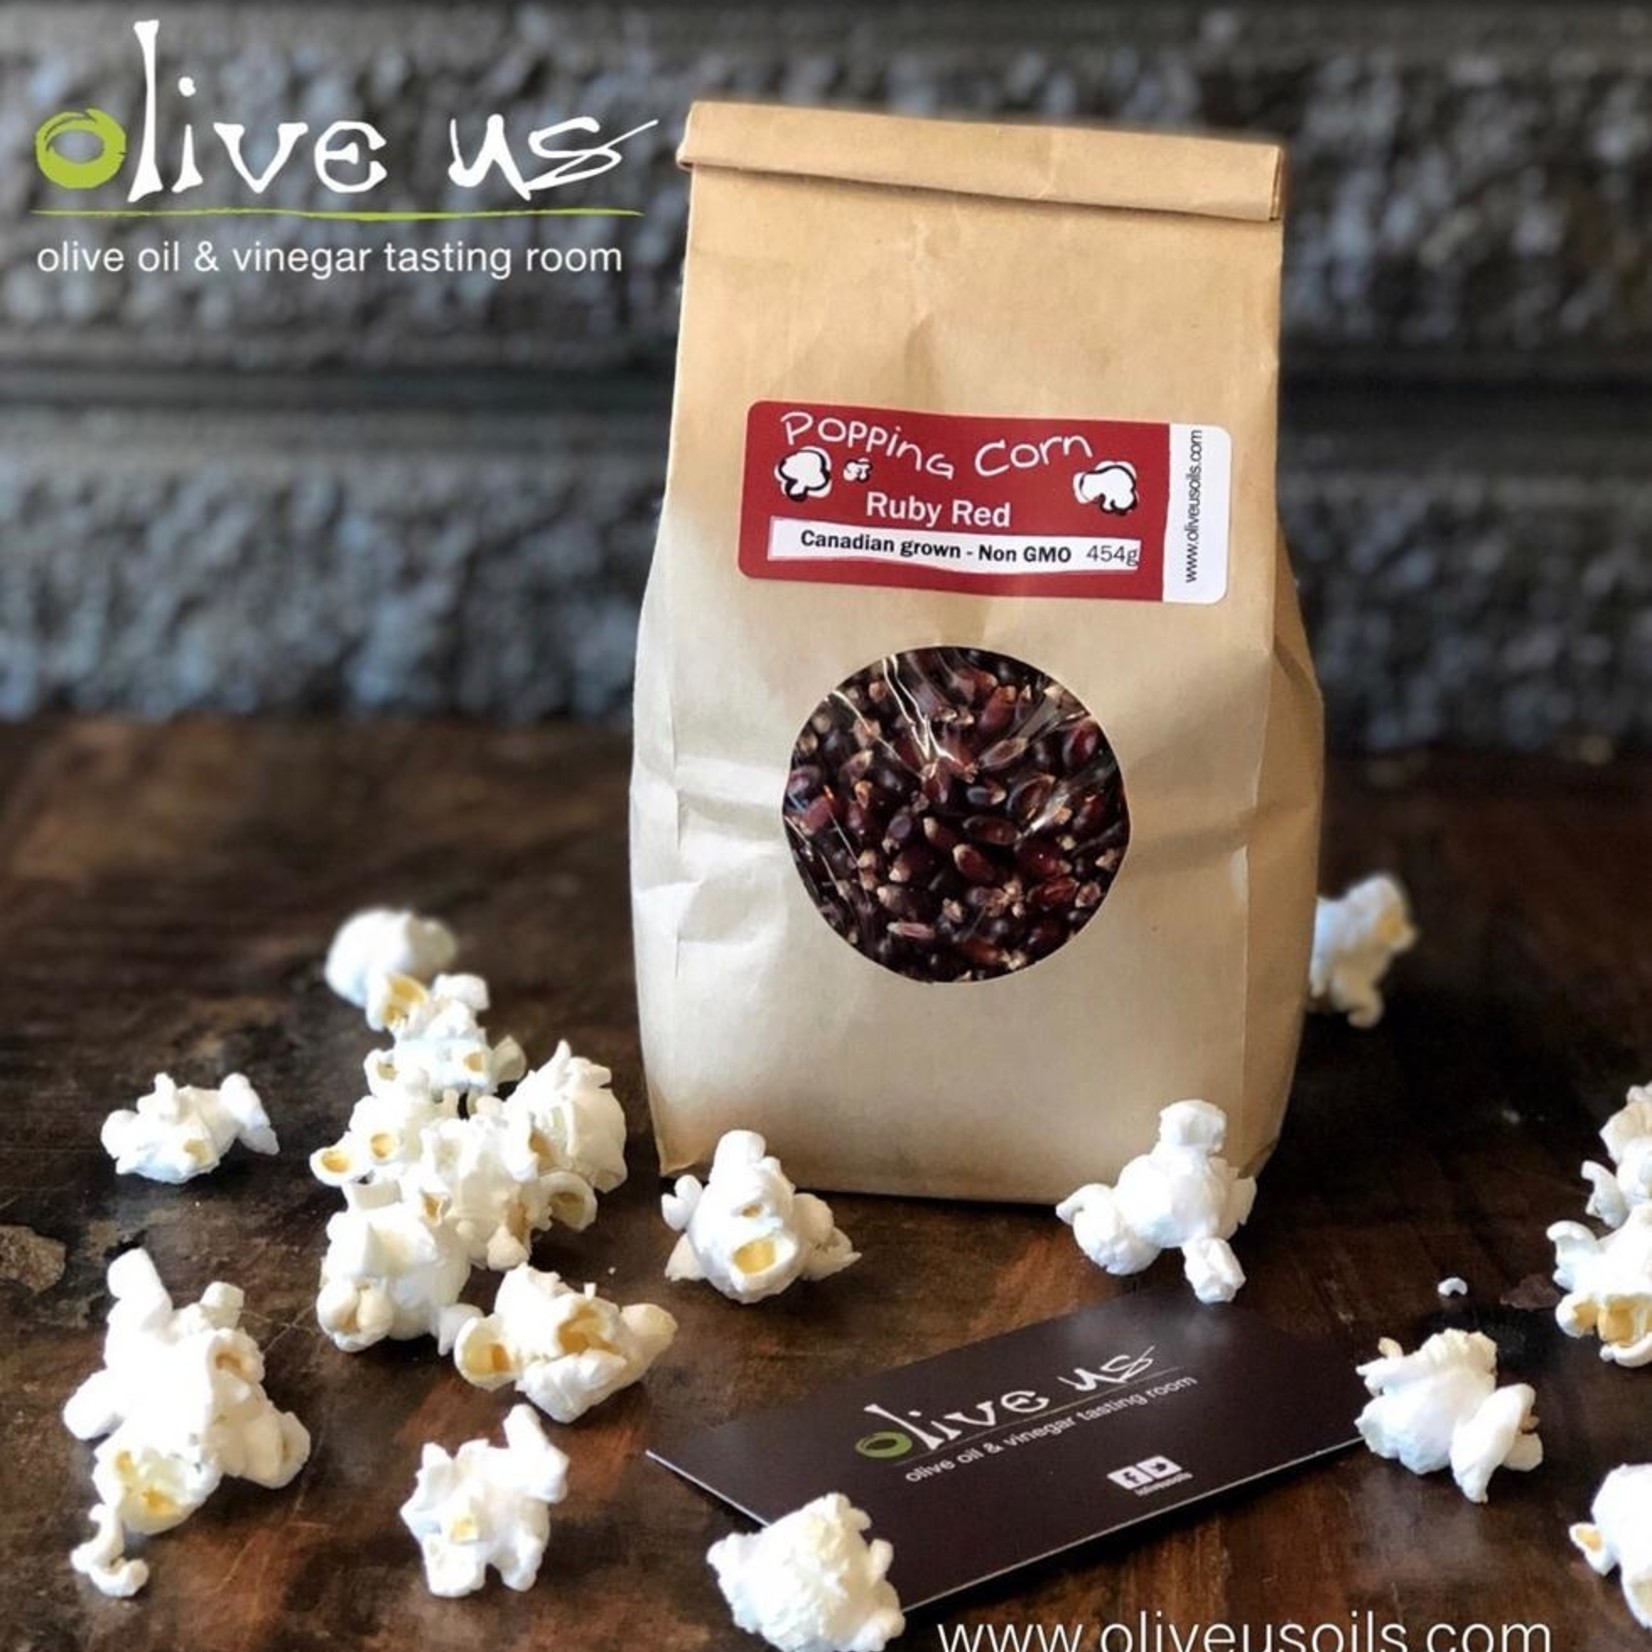 Olive Us Ruby Red Popping Corn 454g